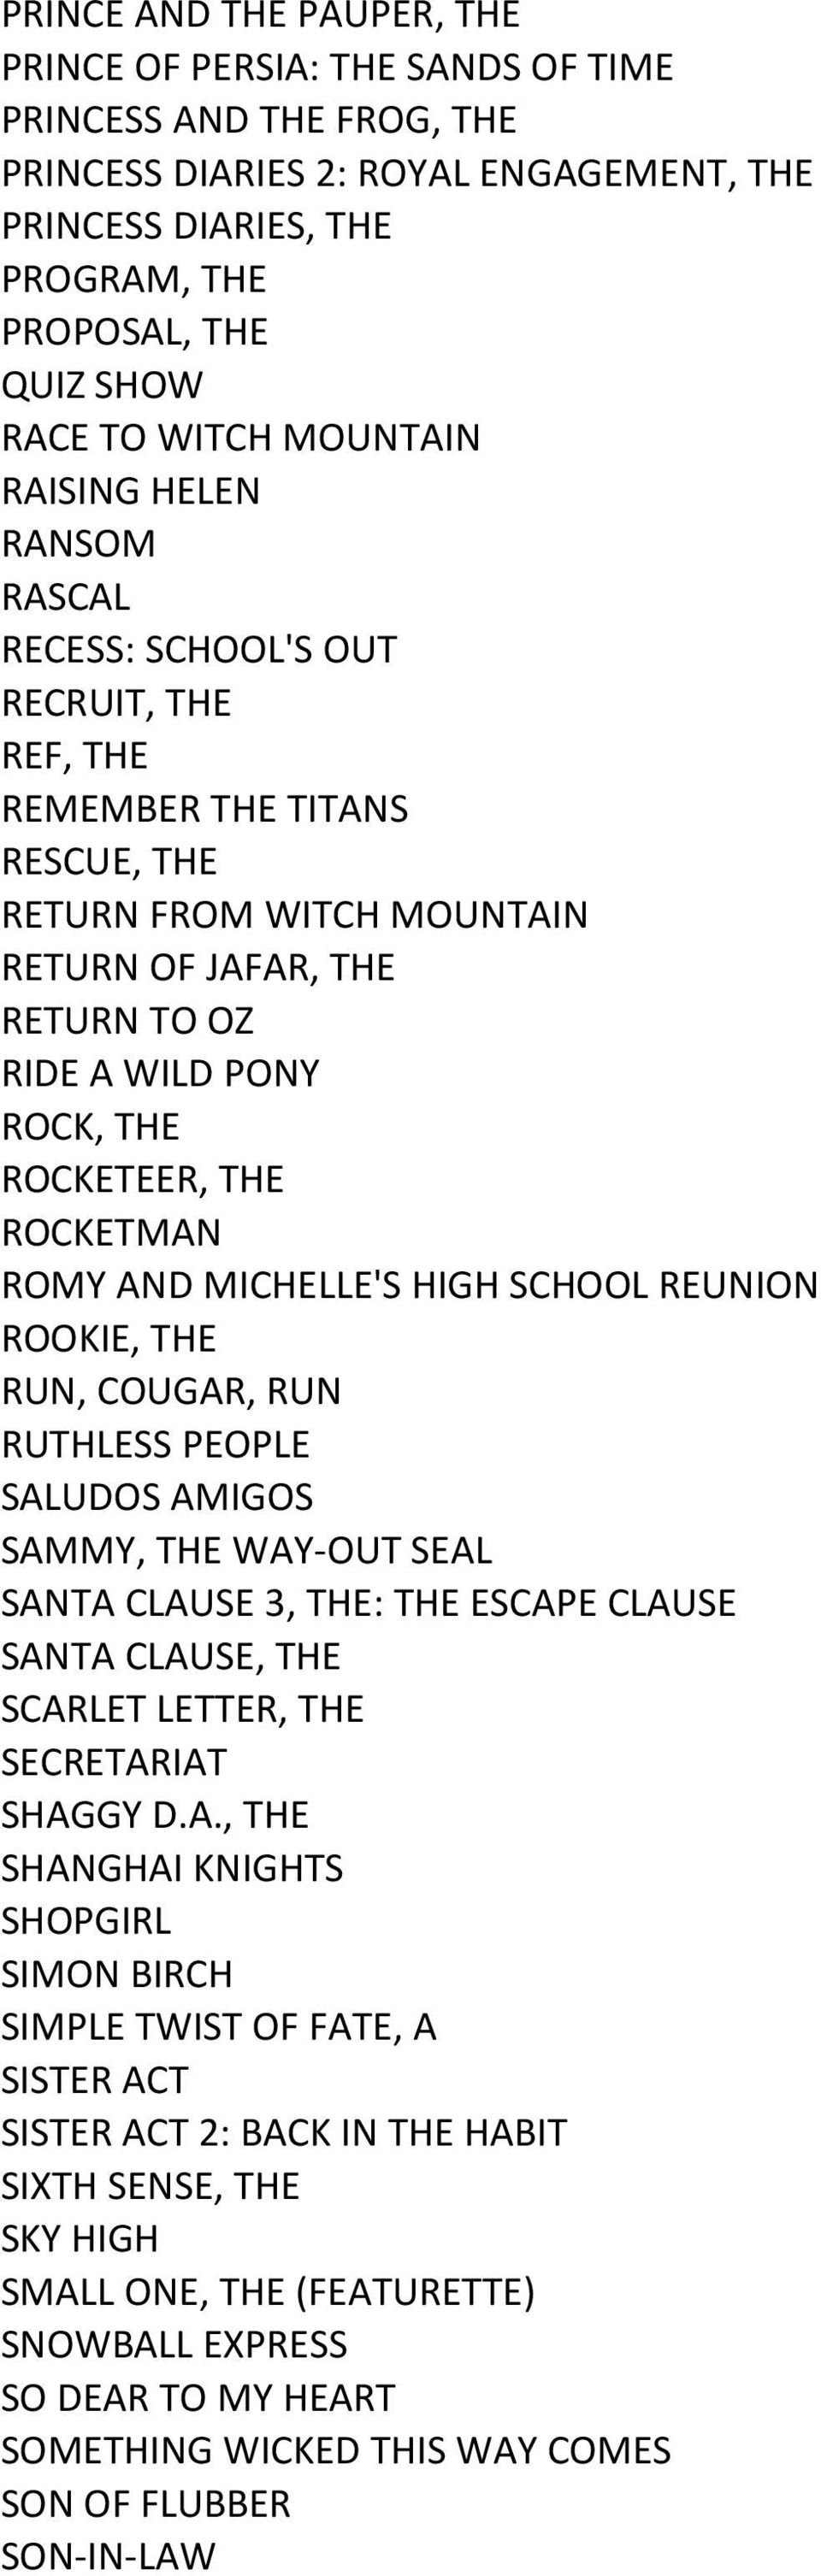 ROCK, THE ROCKETEER, THE ROCKETMAN ROMY AND MICHELLE'S HIGH SCHOOL REUNION ROOKIE, THE RUN, COUGAR, RUN RUTHLESS PEOPLE SALUDOS AMIGOS SAMMY, THE WAY-OUT SEAL SANTA CLAUSE 3, THE: THE ESCAPE CLAUSE